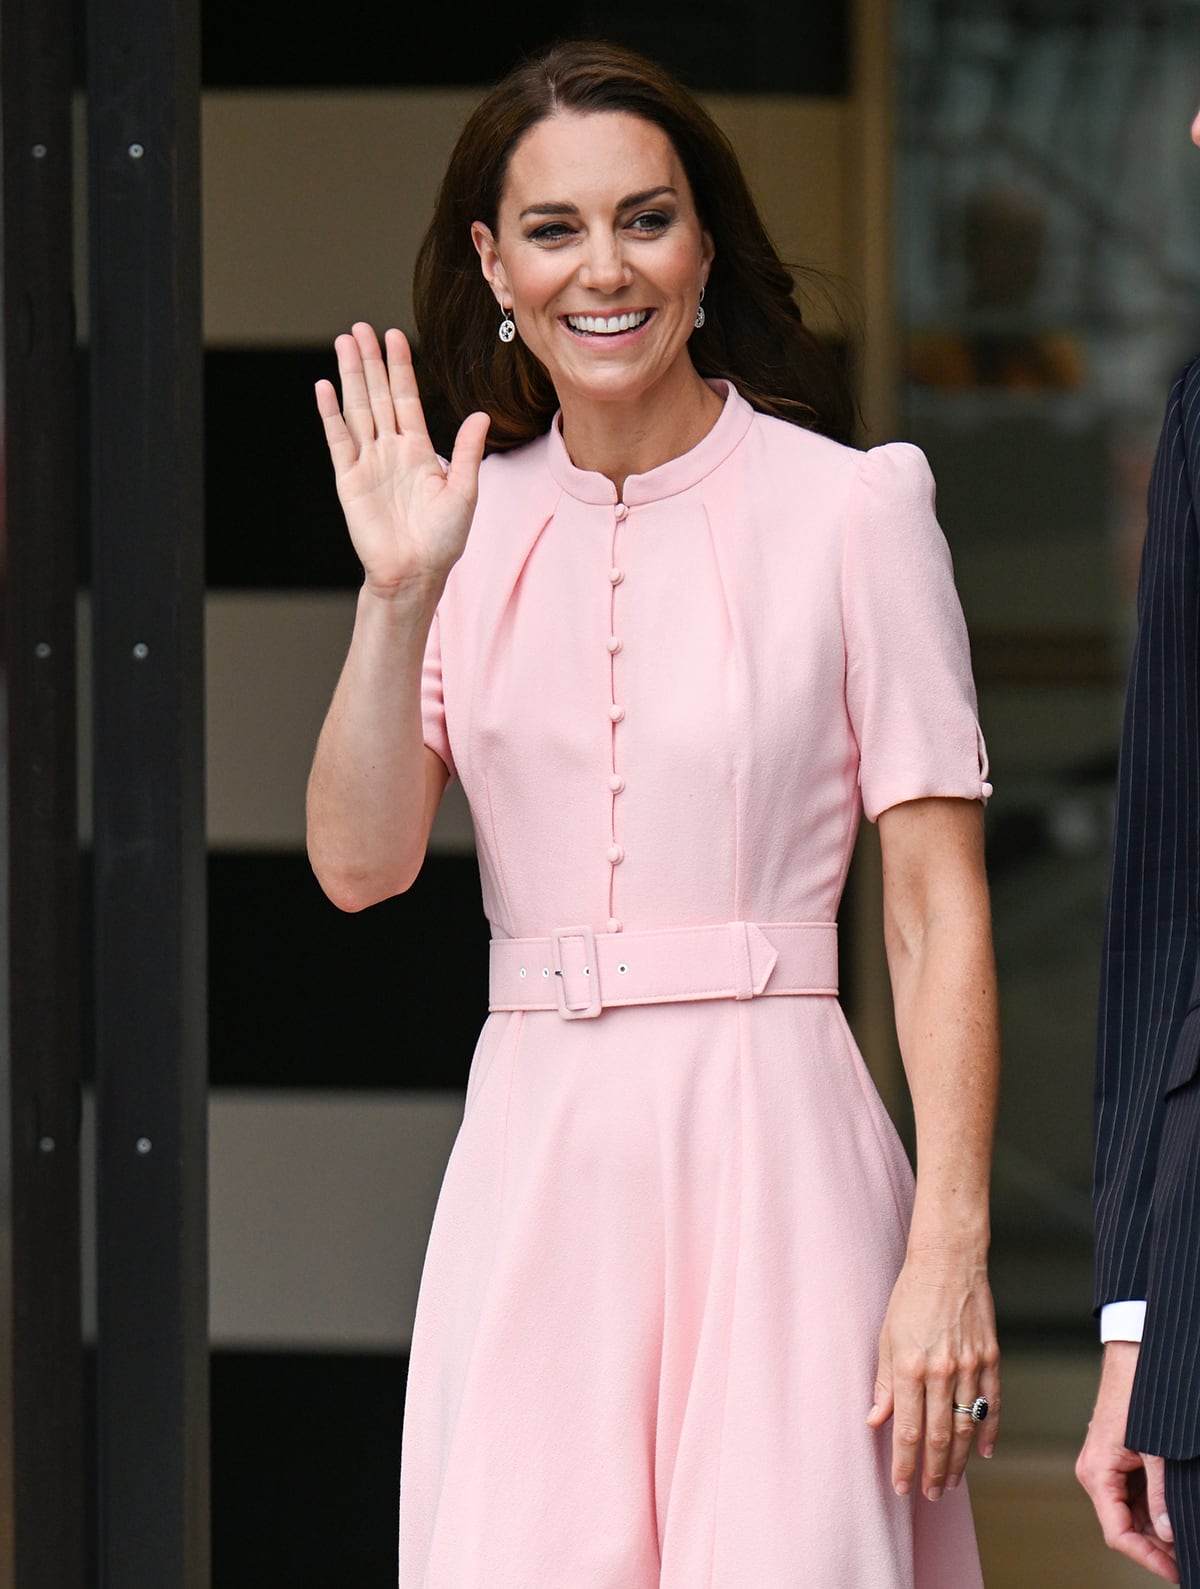 Kate Middleton looks lovely with natural makeup and soft curls